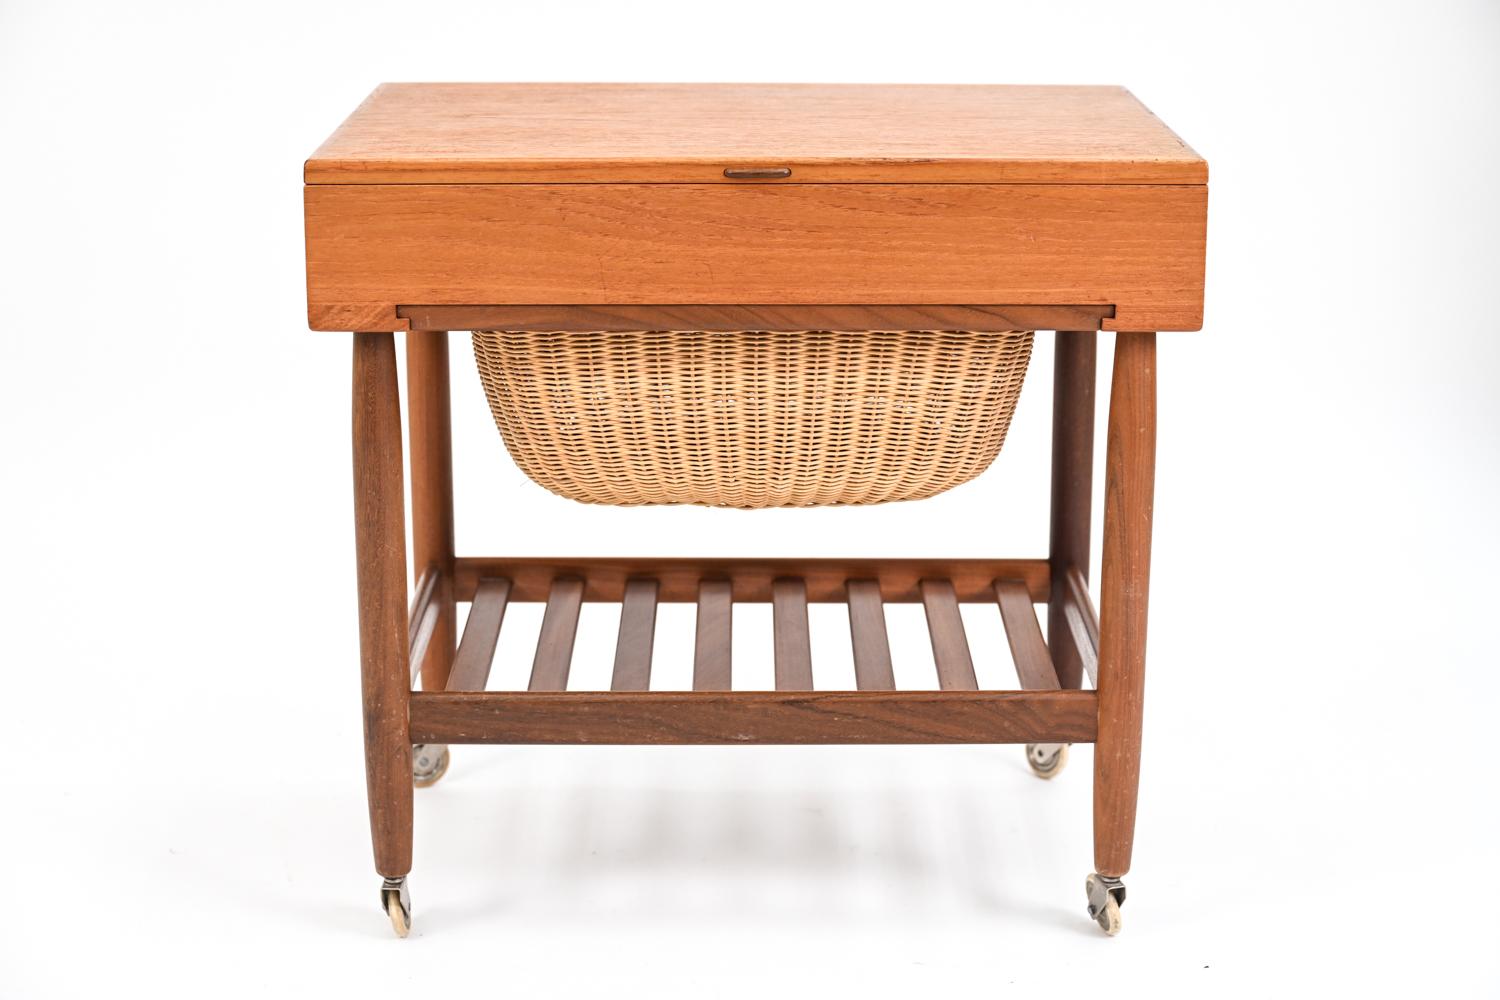 A fabulous Danish mid-century teak sewing cart on casters. Featuring a lift-up top that opens to reveal fitted compartmentalized interior, pull-out wicker basket, and slatted lower tier. On casters. This model was designed by Ejvind Johansson for